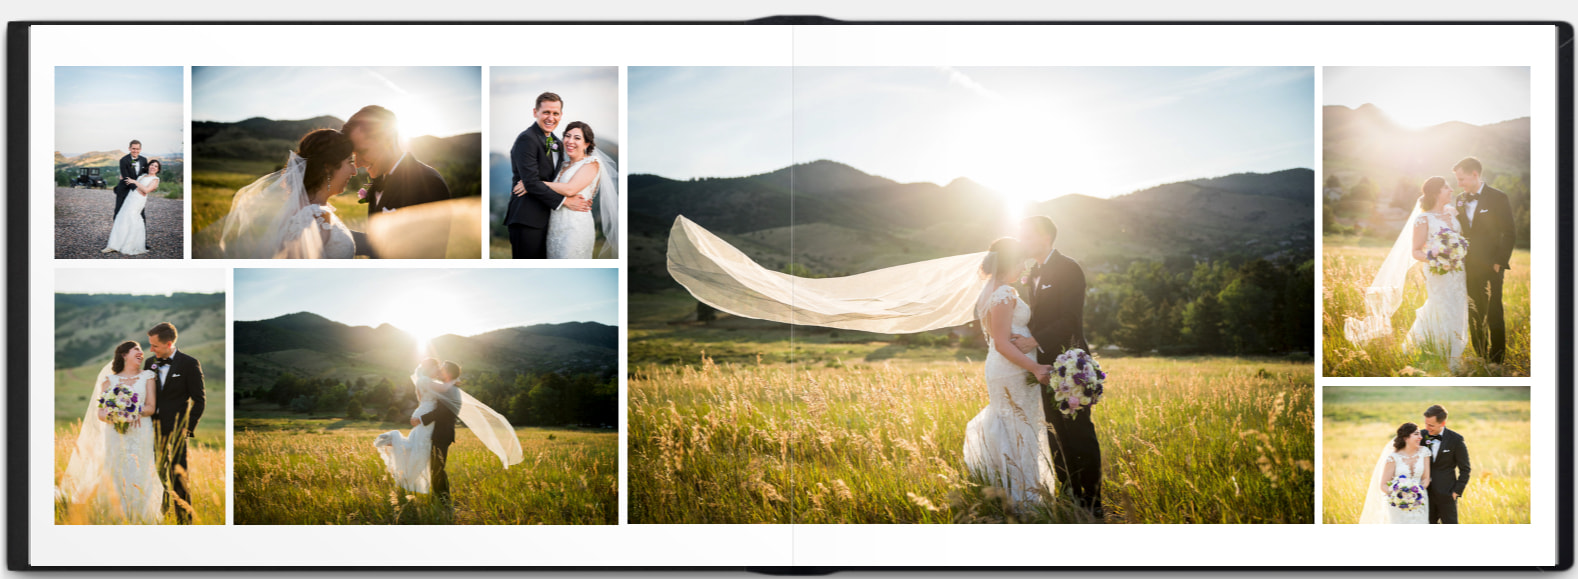 A preview of the inside spread of a wedding album featuring a bride and groom at golden hour.